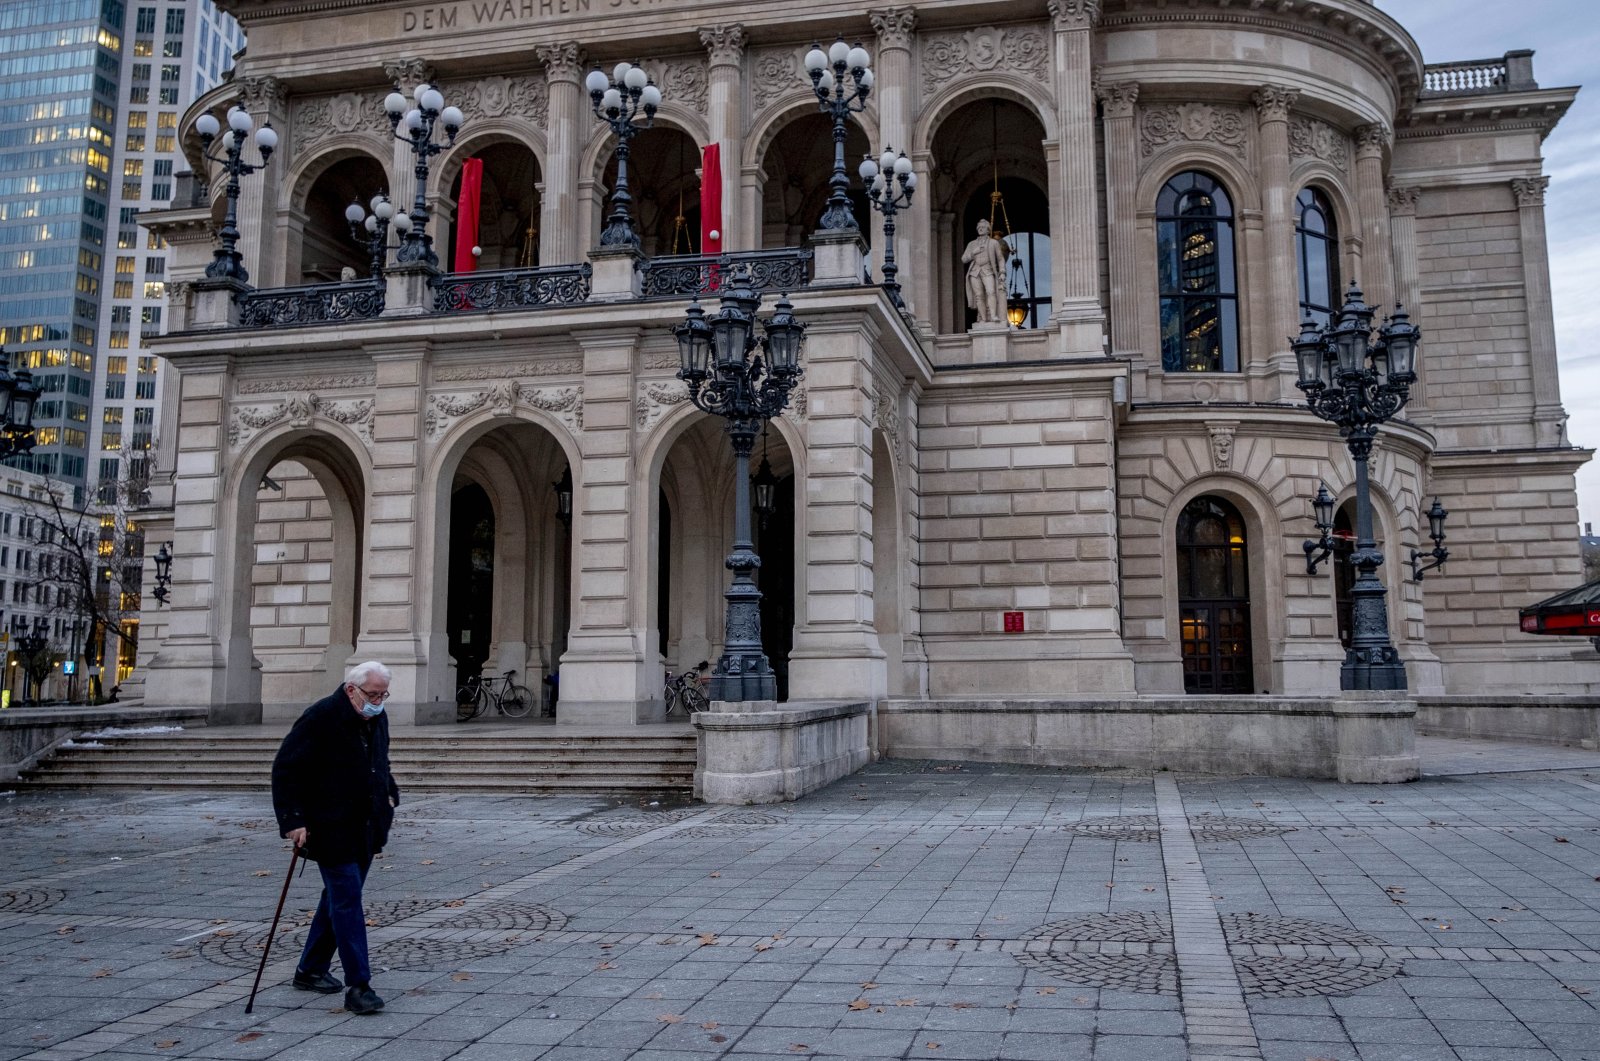 An elderly man with a face mask passes the Old Opera in Frankfurt, Germany, Jan. 14, 2021. (AP Photo)